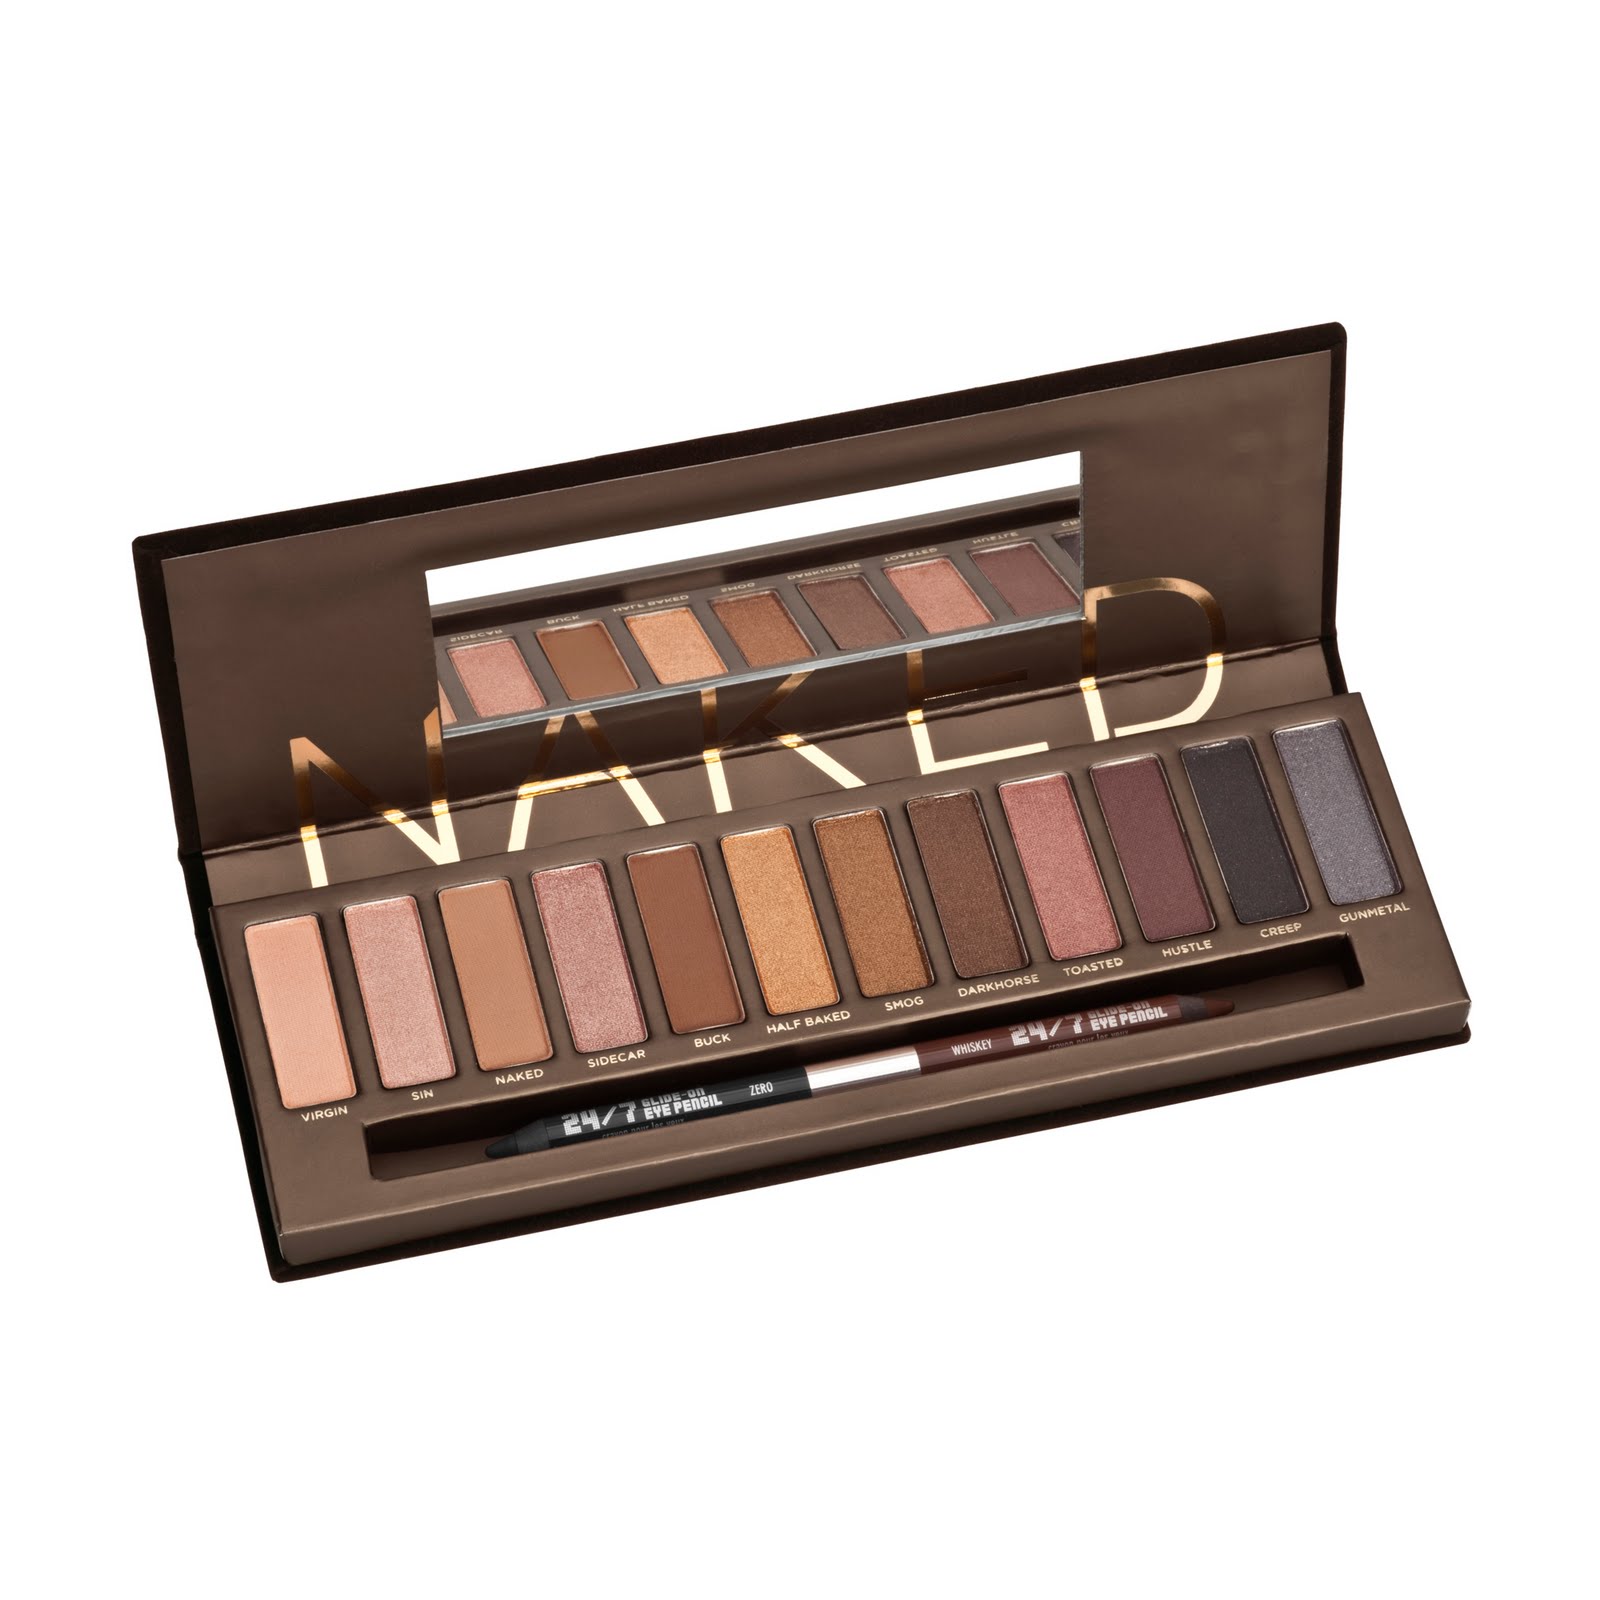 Urban Decay is discontinuing its popular Naked eyeshadow 